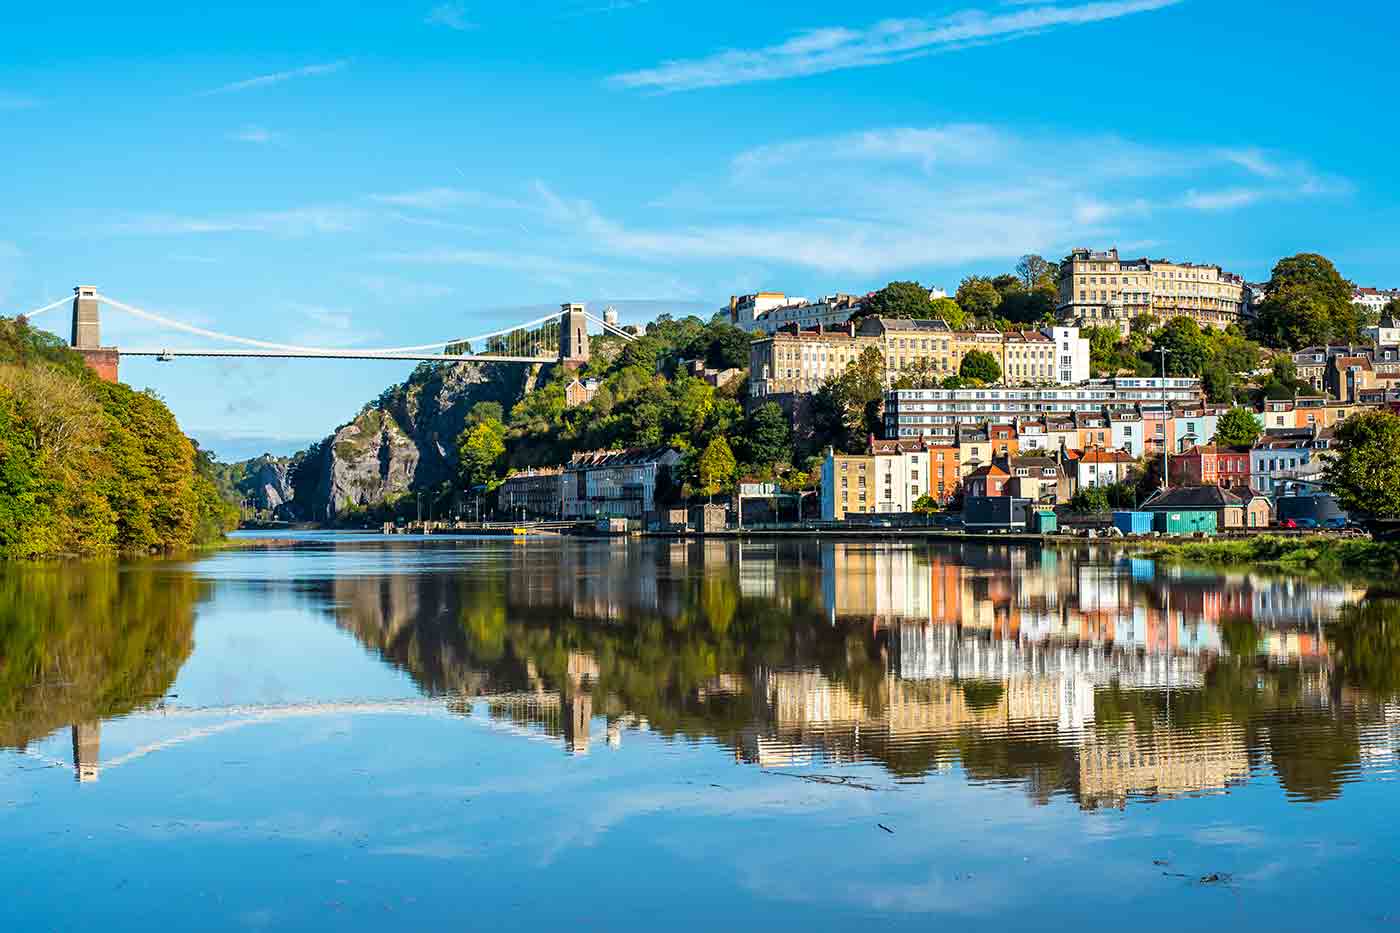 places to visit near to bristol